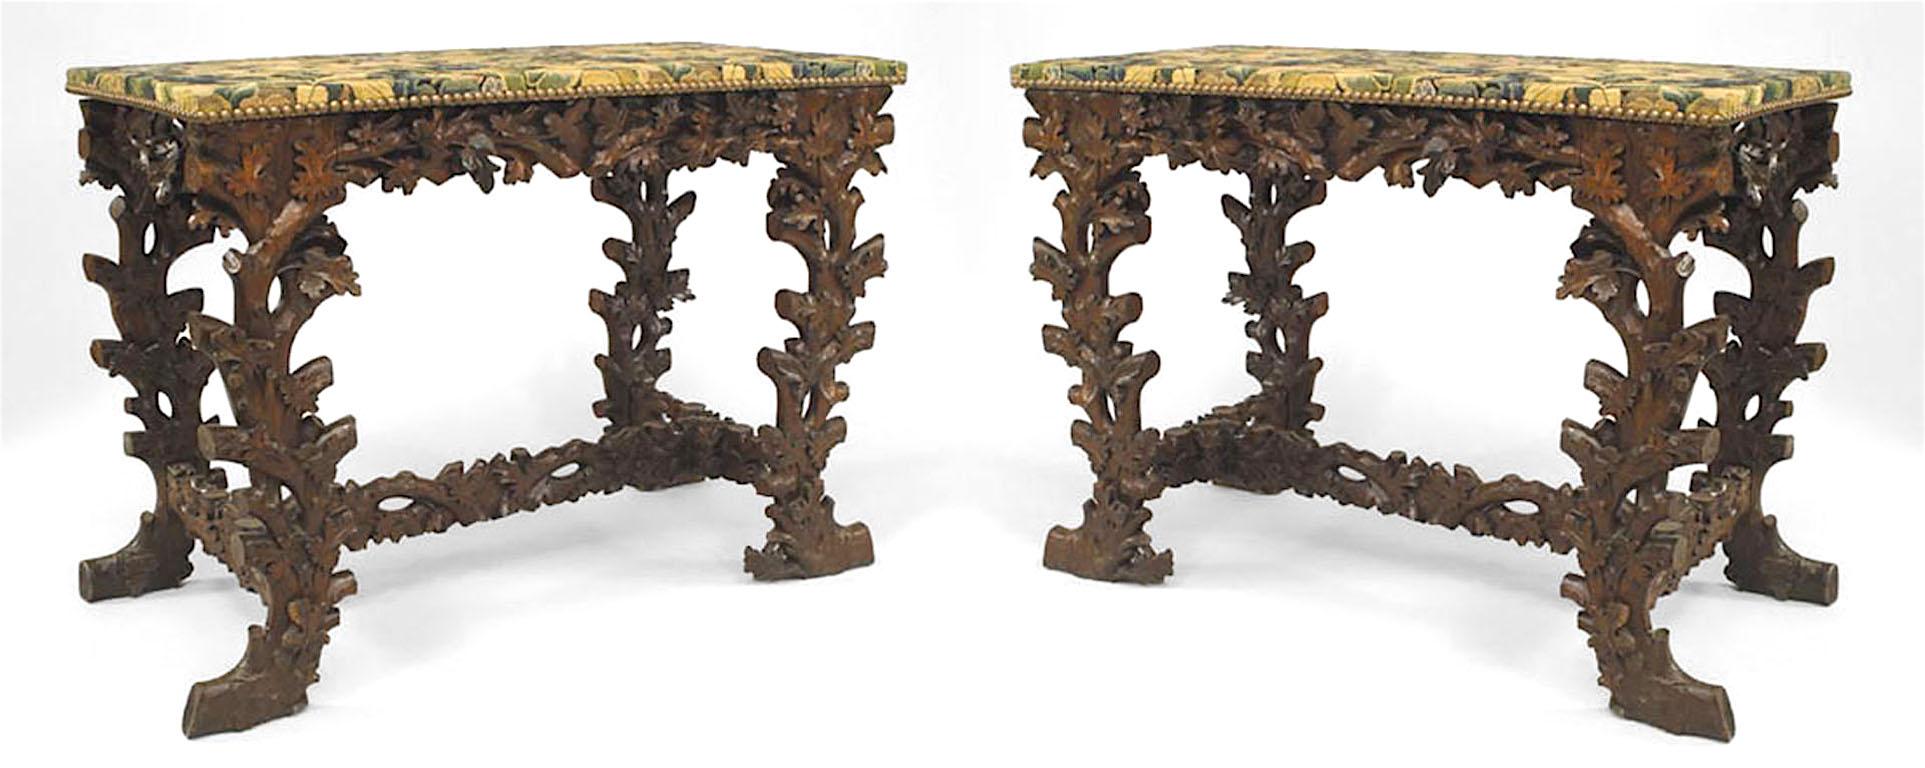 Pair of Rustic Black Forest (19th Century) walnut console tables with floral carving and stretcher with tapestry covered tops. (PRICED AS Pair)
